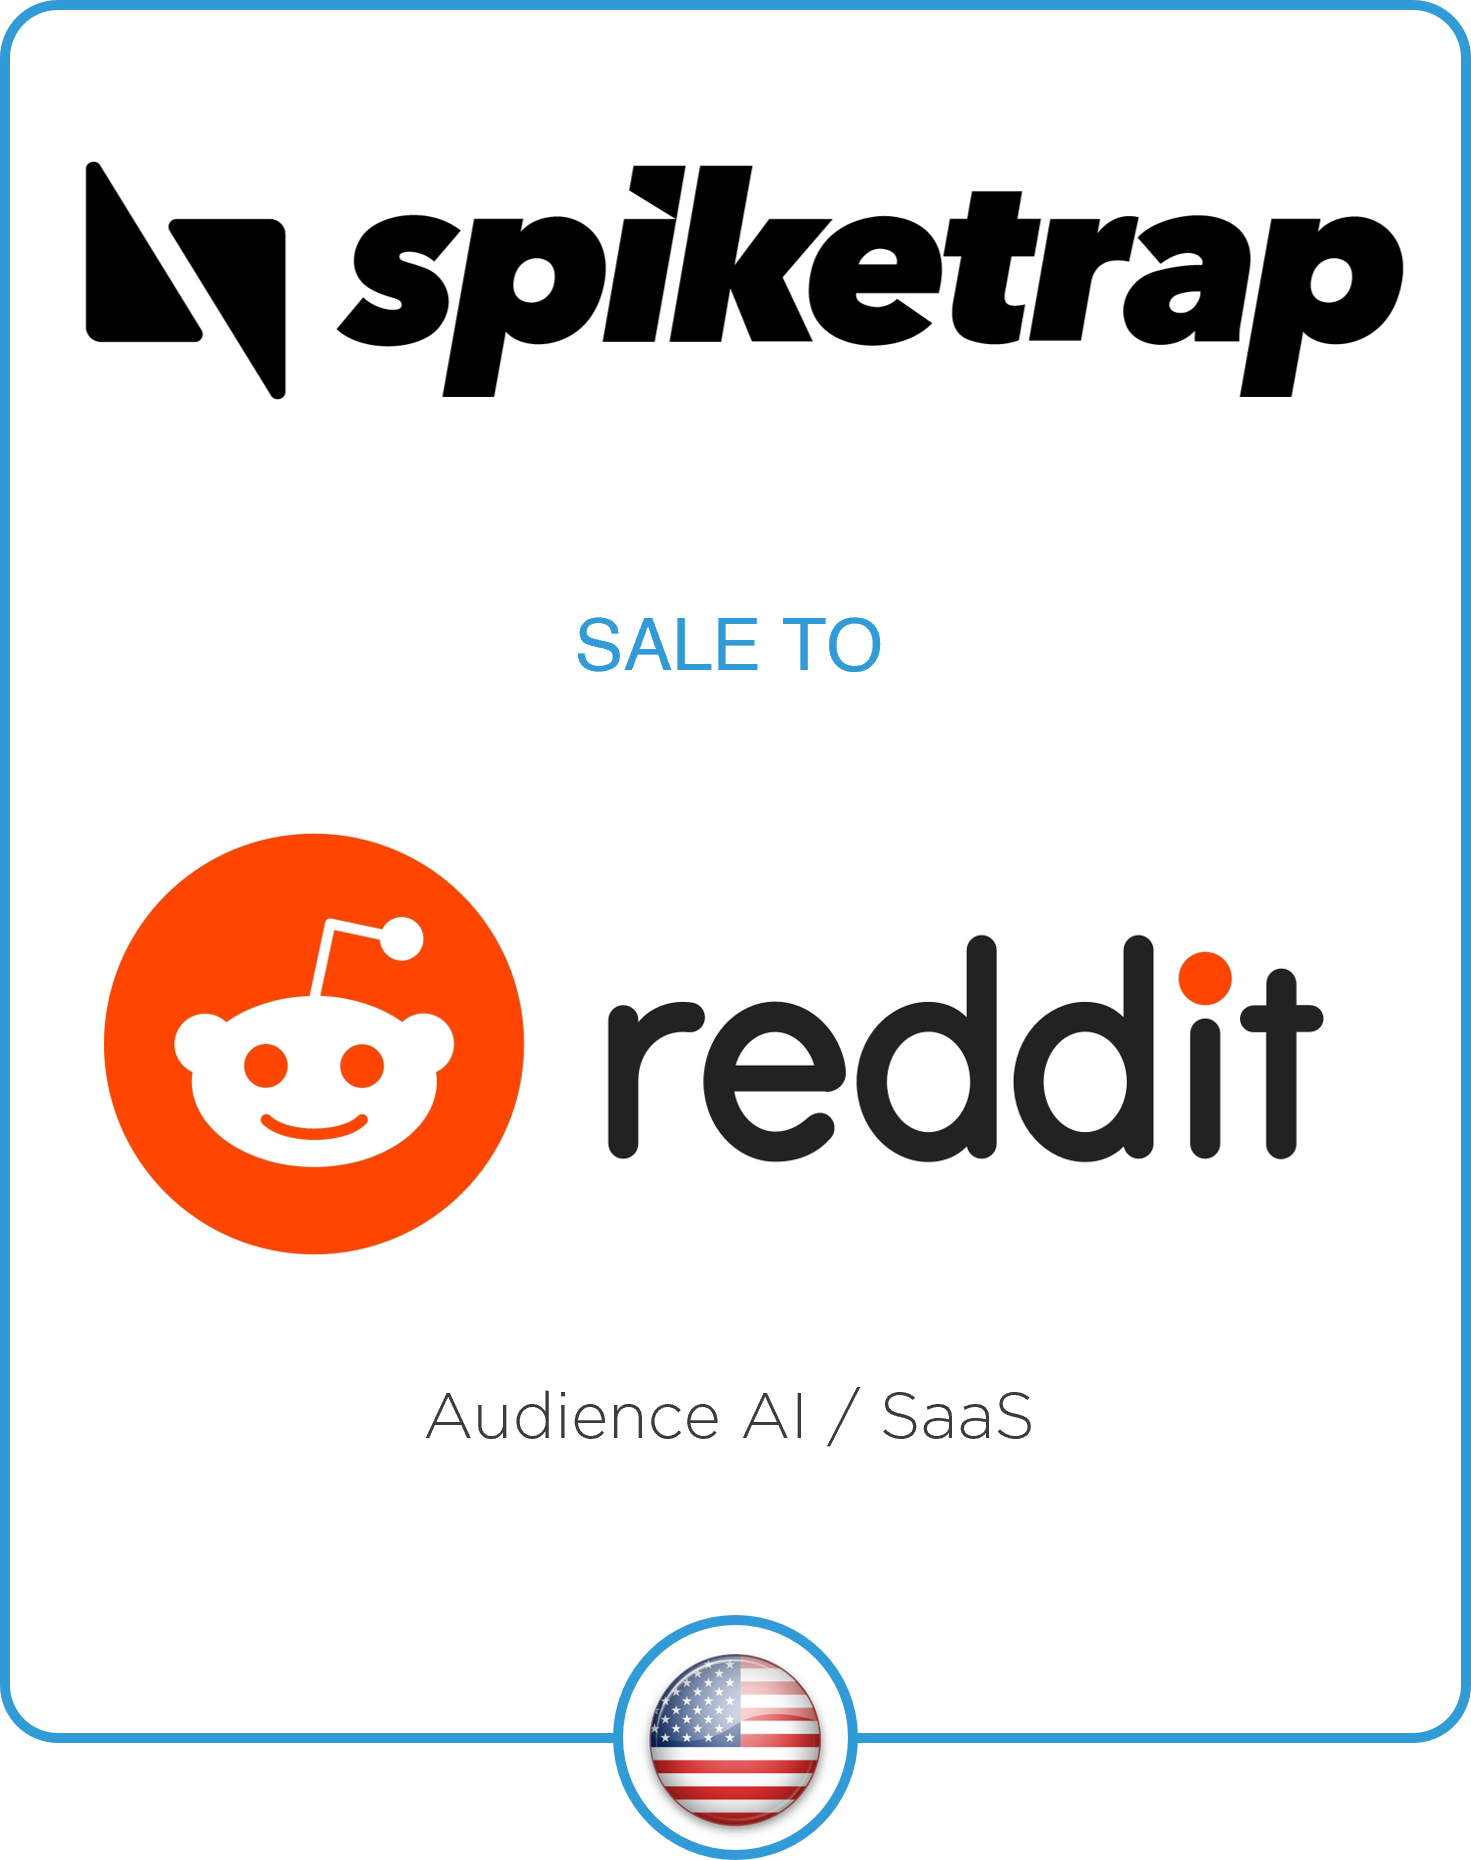 Drake Star Acts as Exclusive Financial Advisor to Spiketrap on its Sale to Reddit